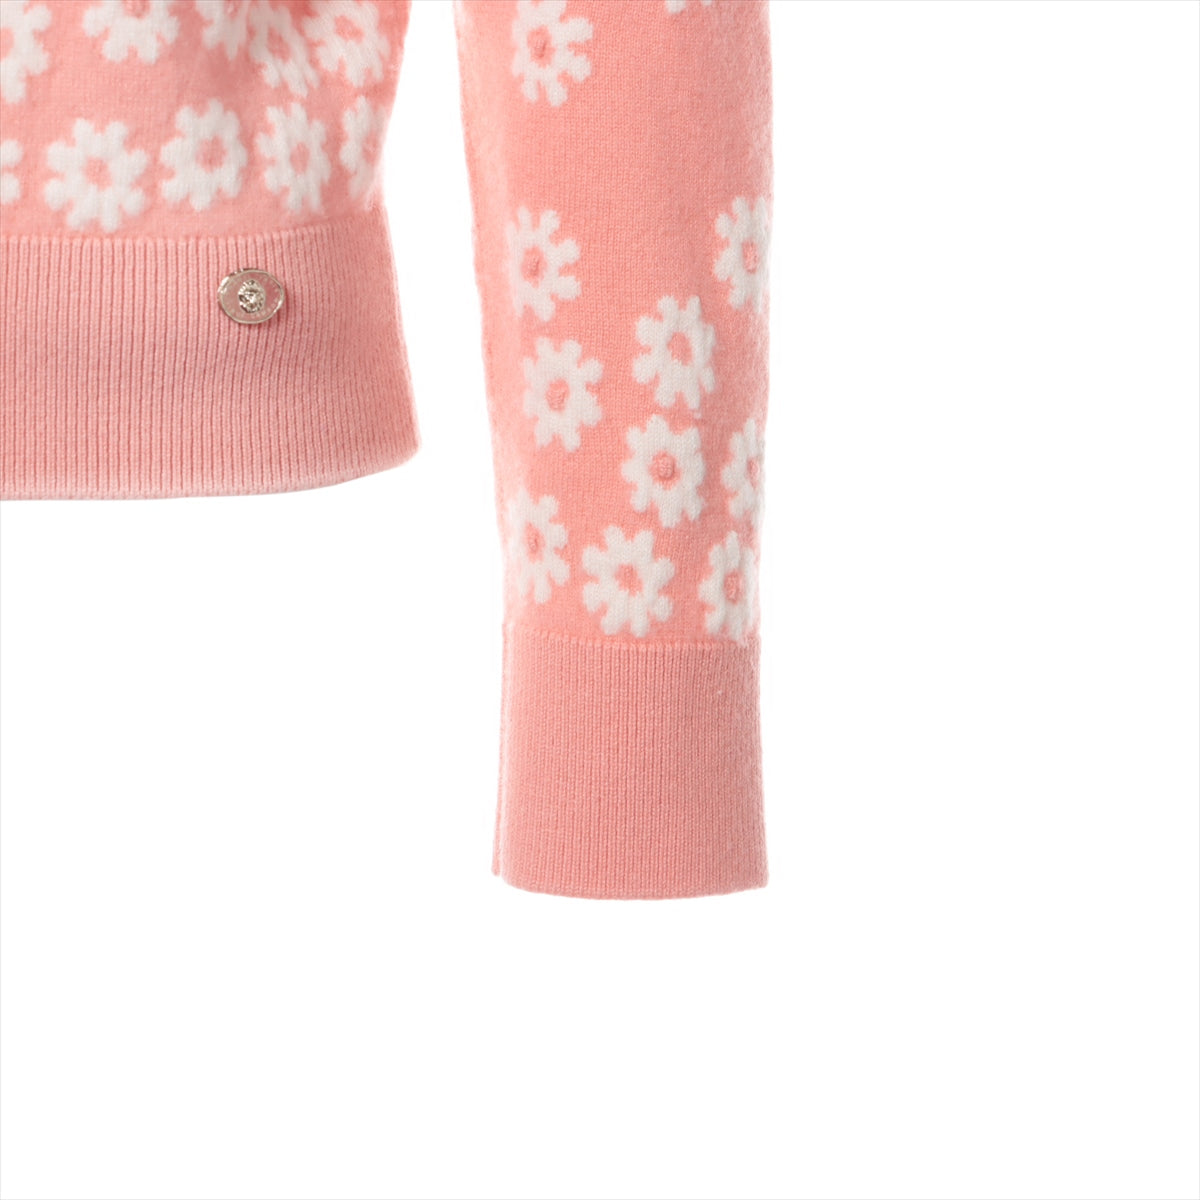 Chanel Coco Mark 22SS Cashmere x nylon Knit 34 Ladies' Pink  P72453 Daisy Lion button